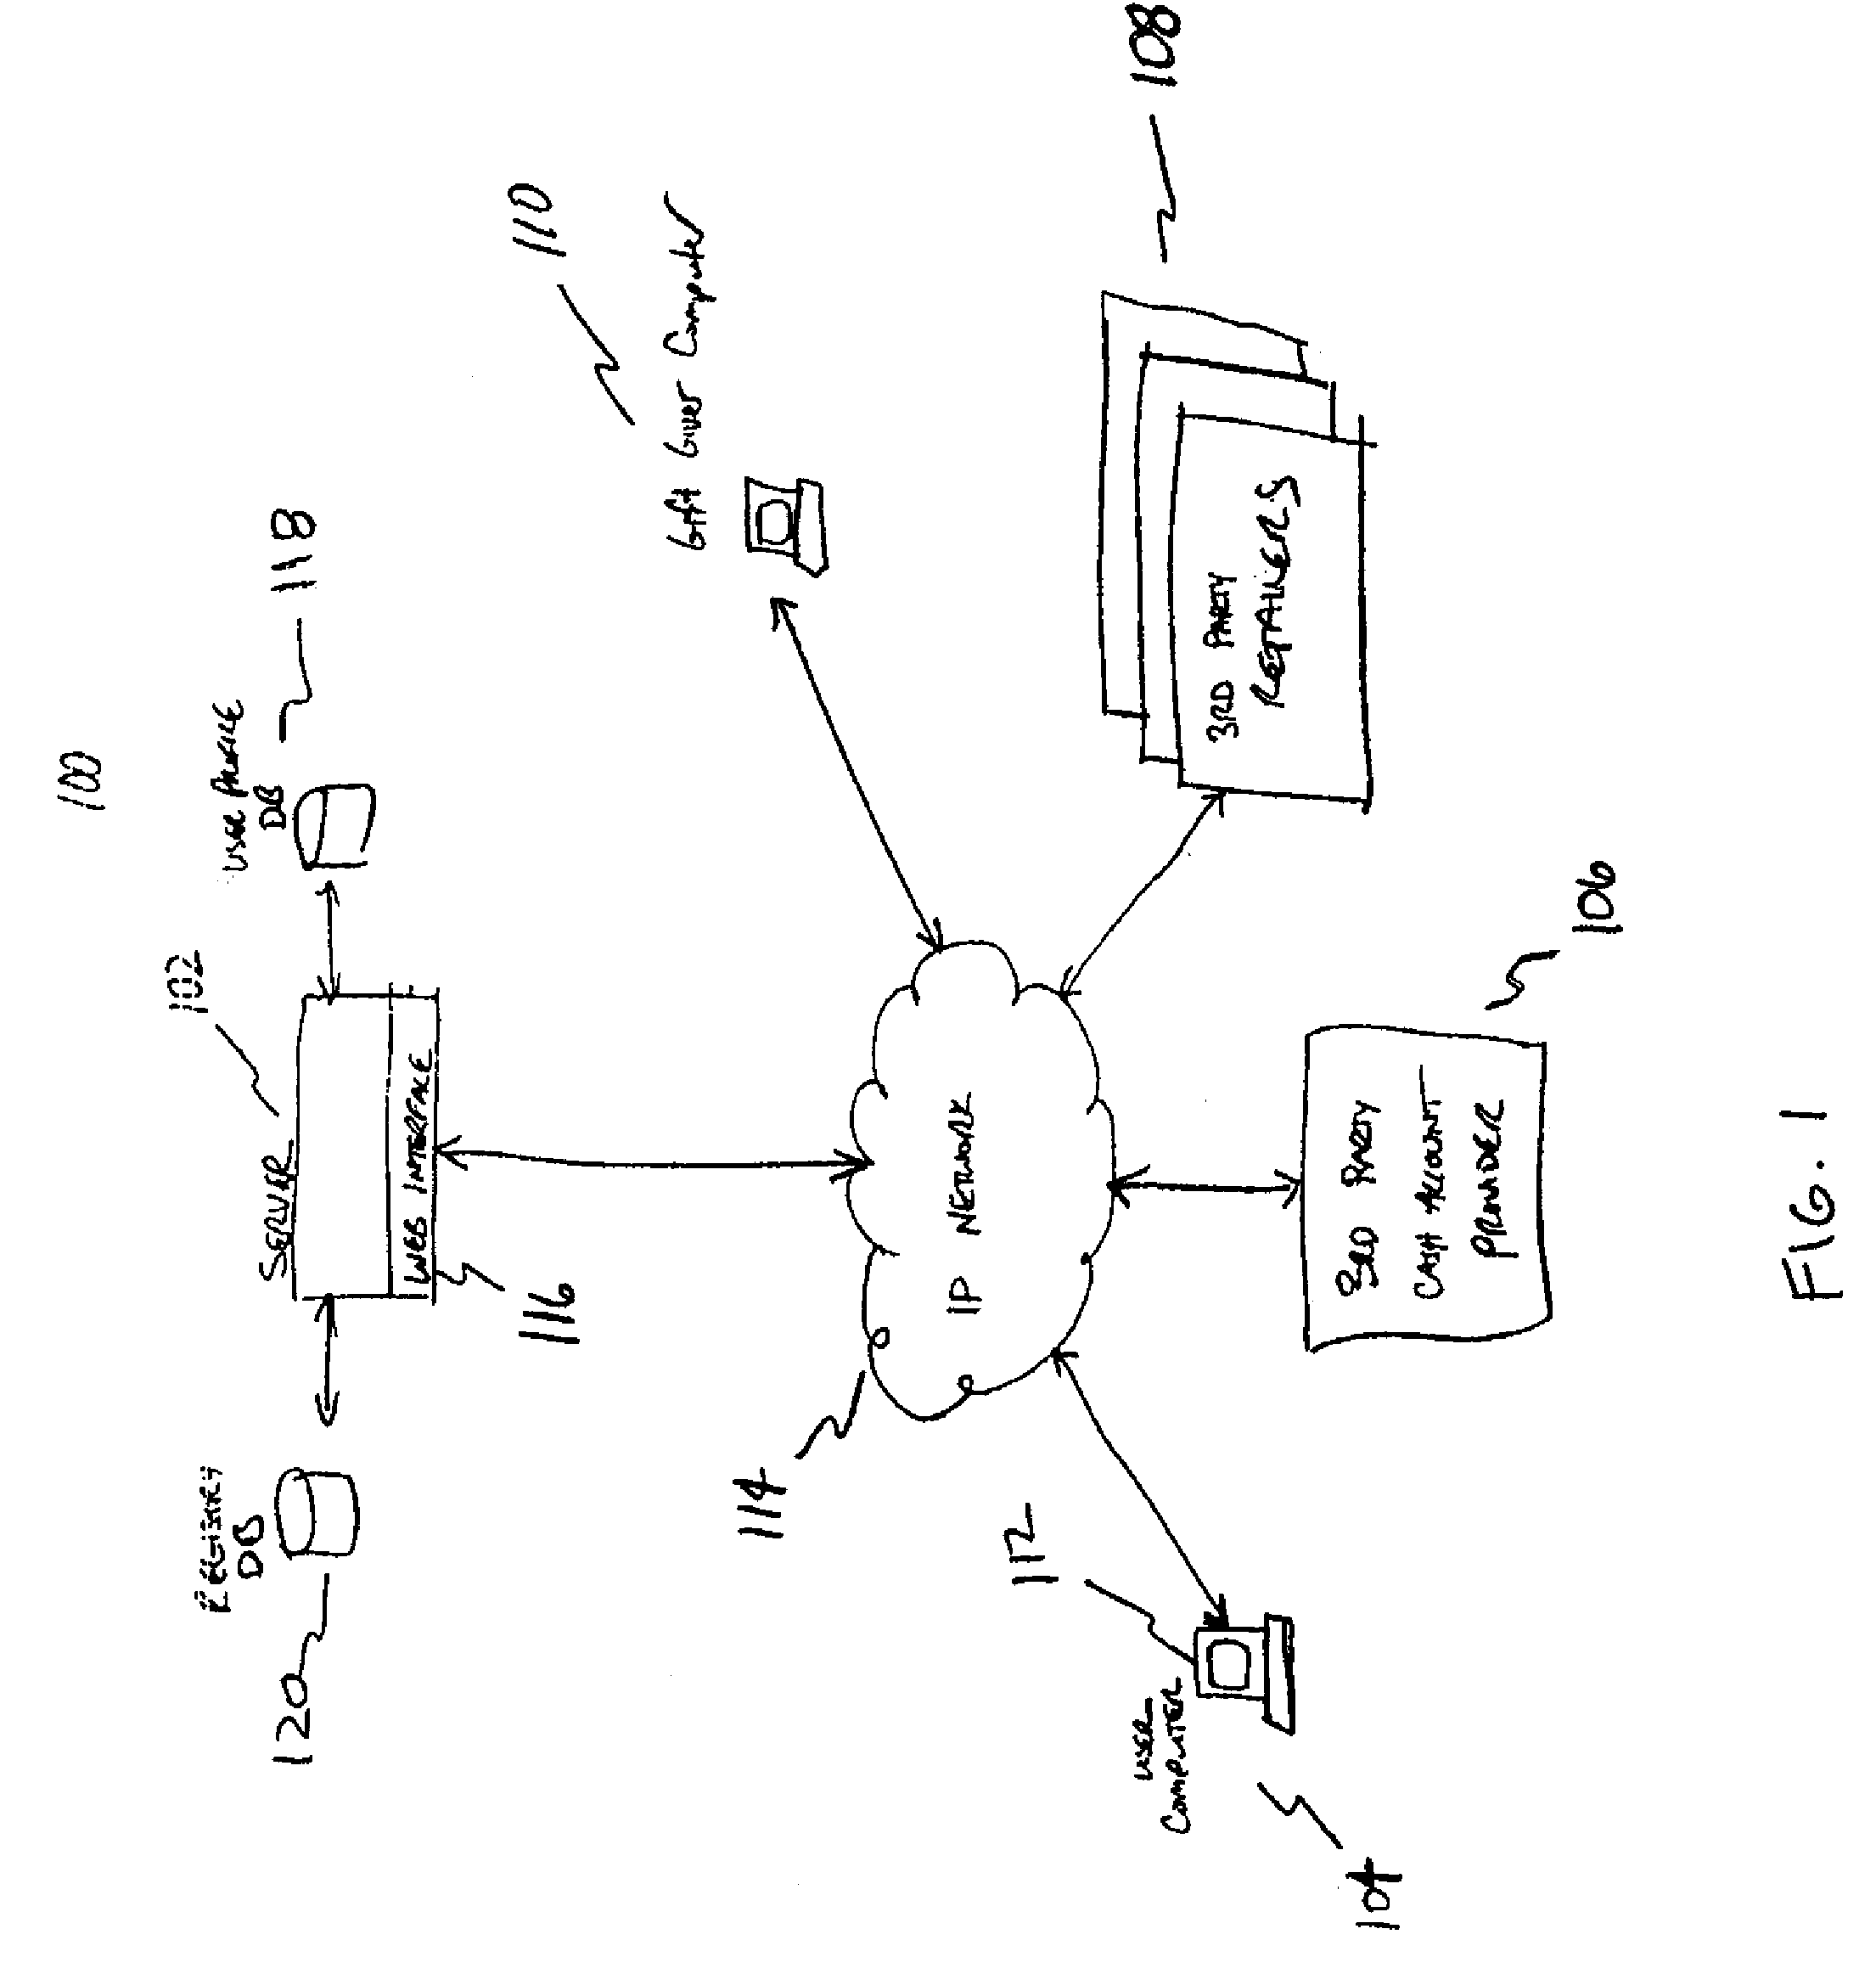 System and method for enabling cash gifts in an online registry